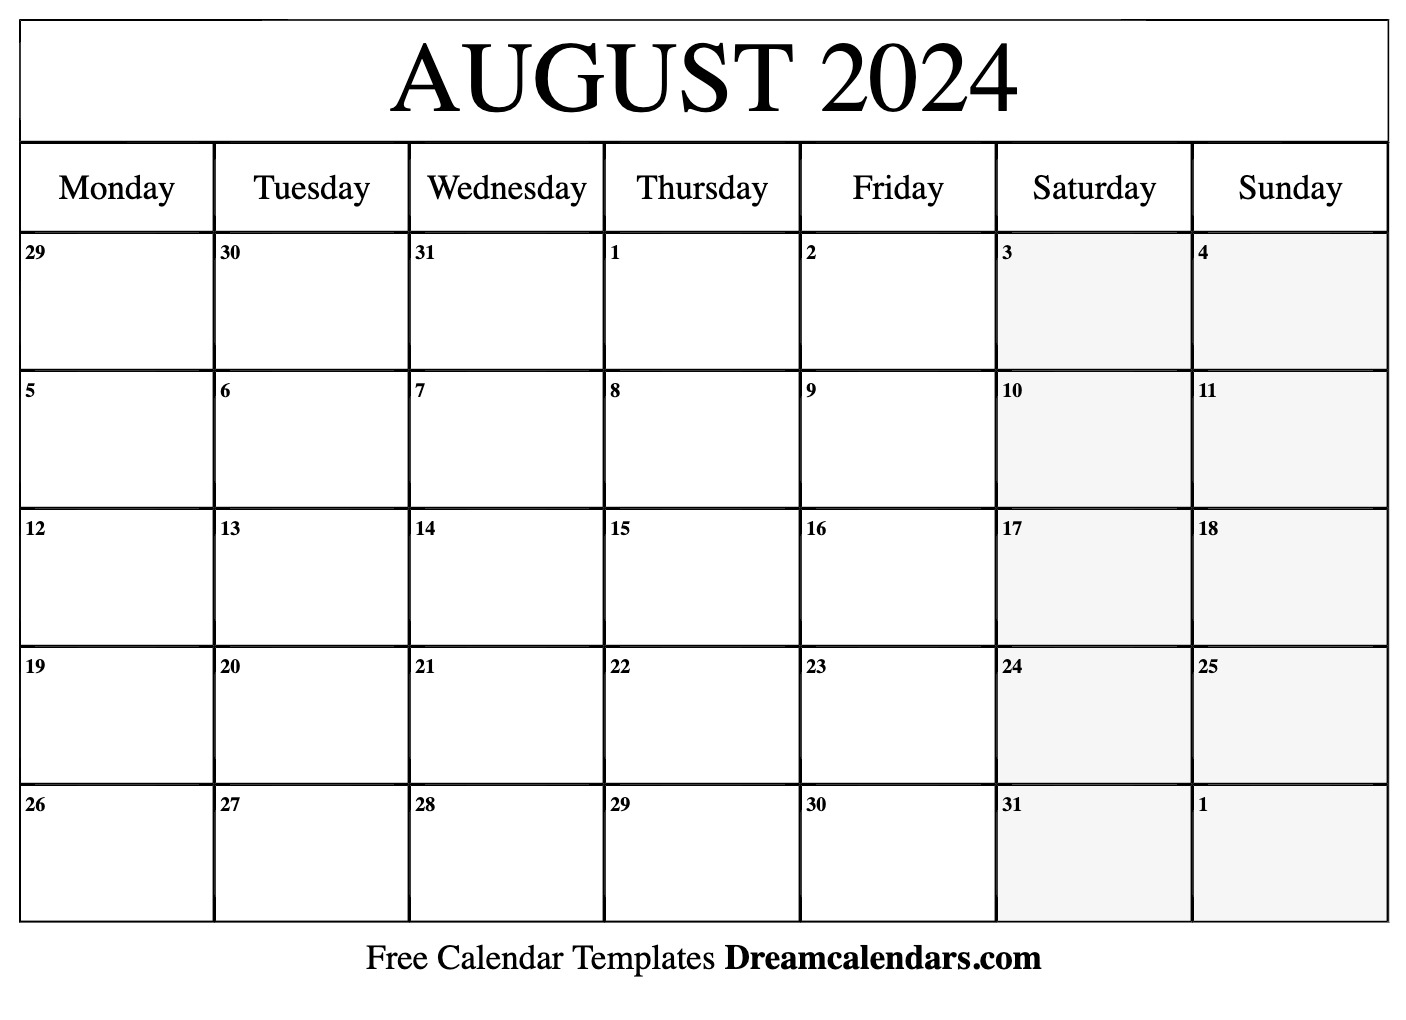 August 2024 Calendar | Free Blank Printable With Holidays for Printable August Calendar 2024